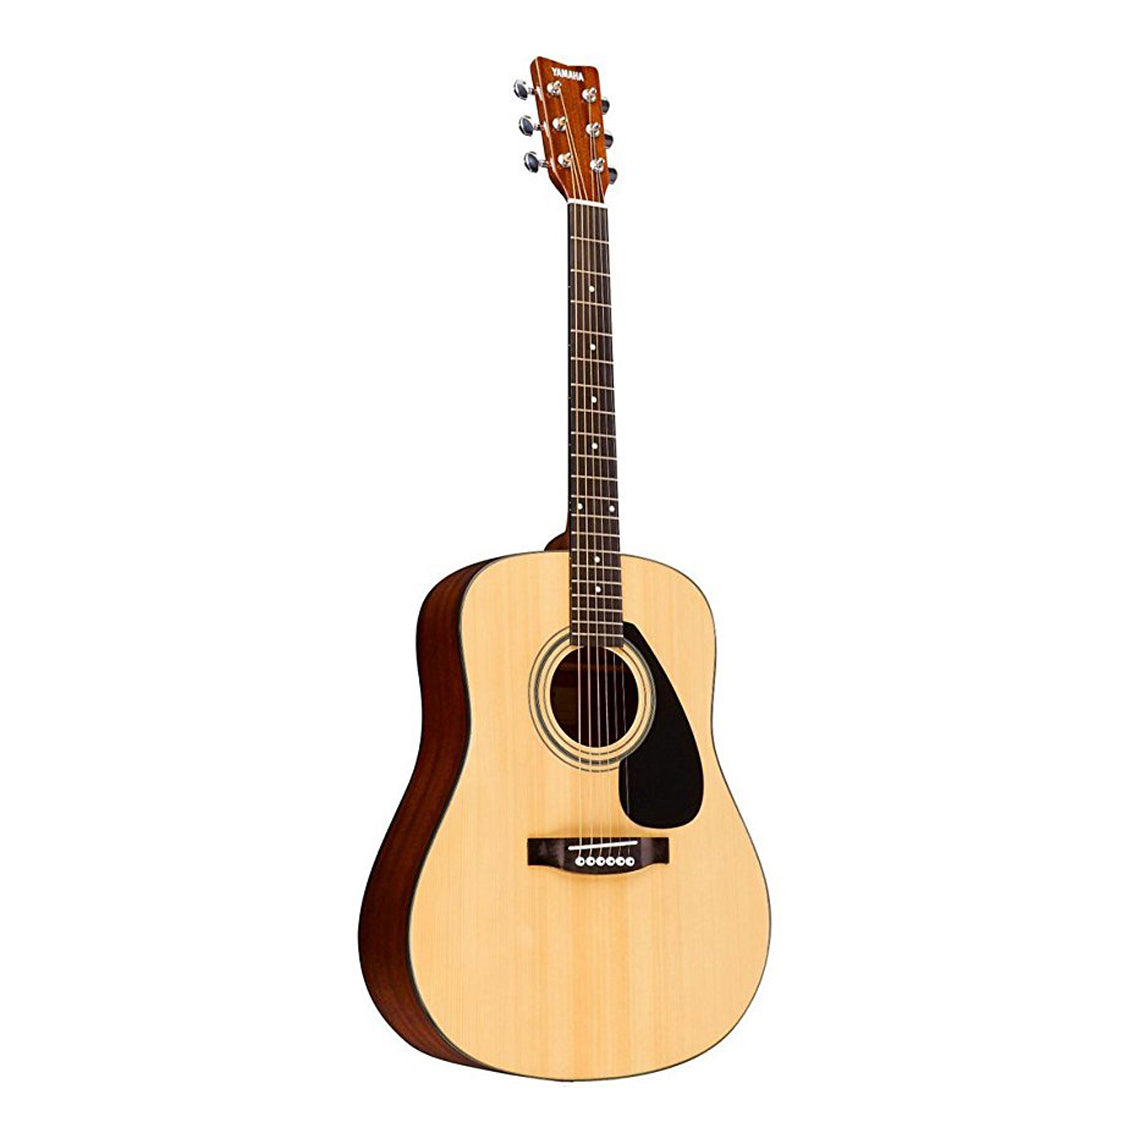 Yamaha Gigmaker Deluxe Acoustic Guitar Package with Gig Bag, Tuner,  Instructional DVD, Strap, Strings, and Picks - Natural Finish